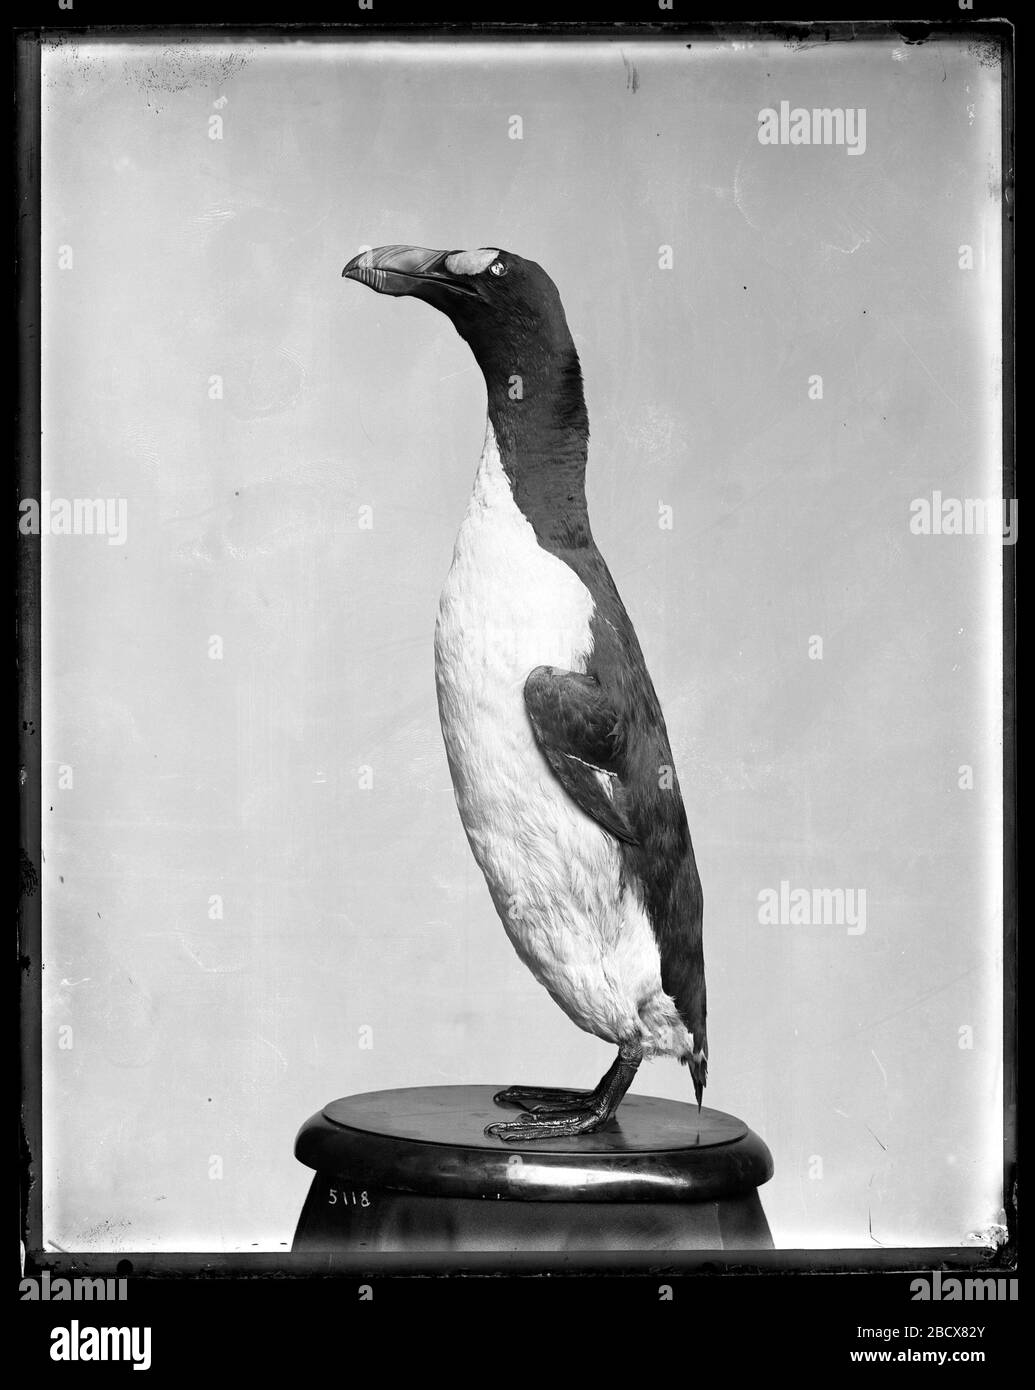 Mounted Model of a Great Auk. See Annual Report of the Board of Regents, including USNM, 1892, Plate XXXVII.Specimen collected by C.E. Gotz, Isle of Eldey, Iceland, North Atlantic Ocean, June 1834. USNM Cat. No. 57338.As first prepared. This specimen was later remodeled by taxidermist Nelson R. MNH-5118 Stock Photo